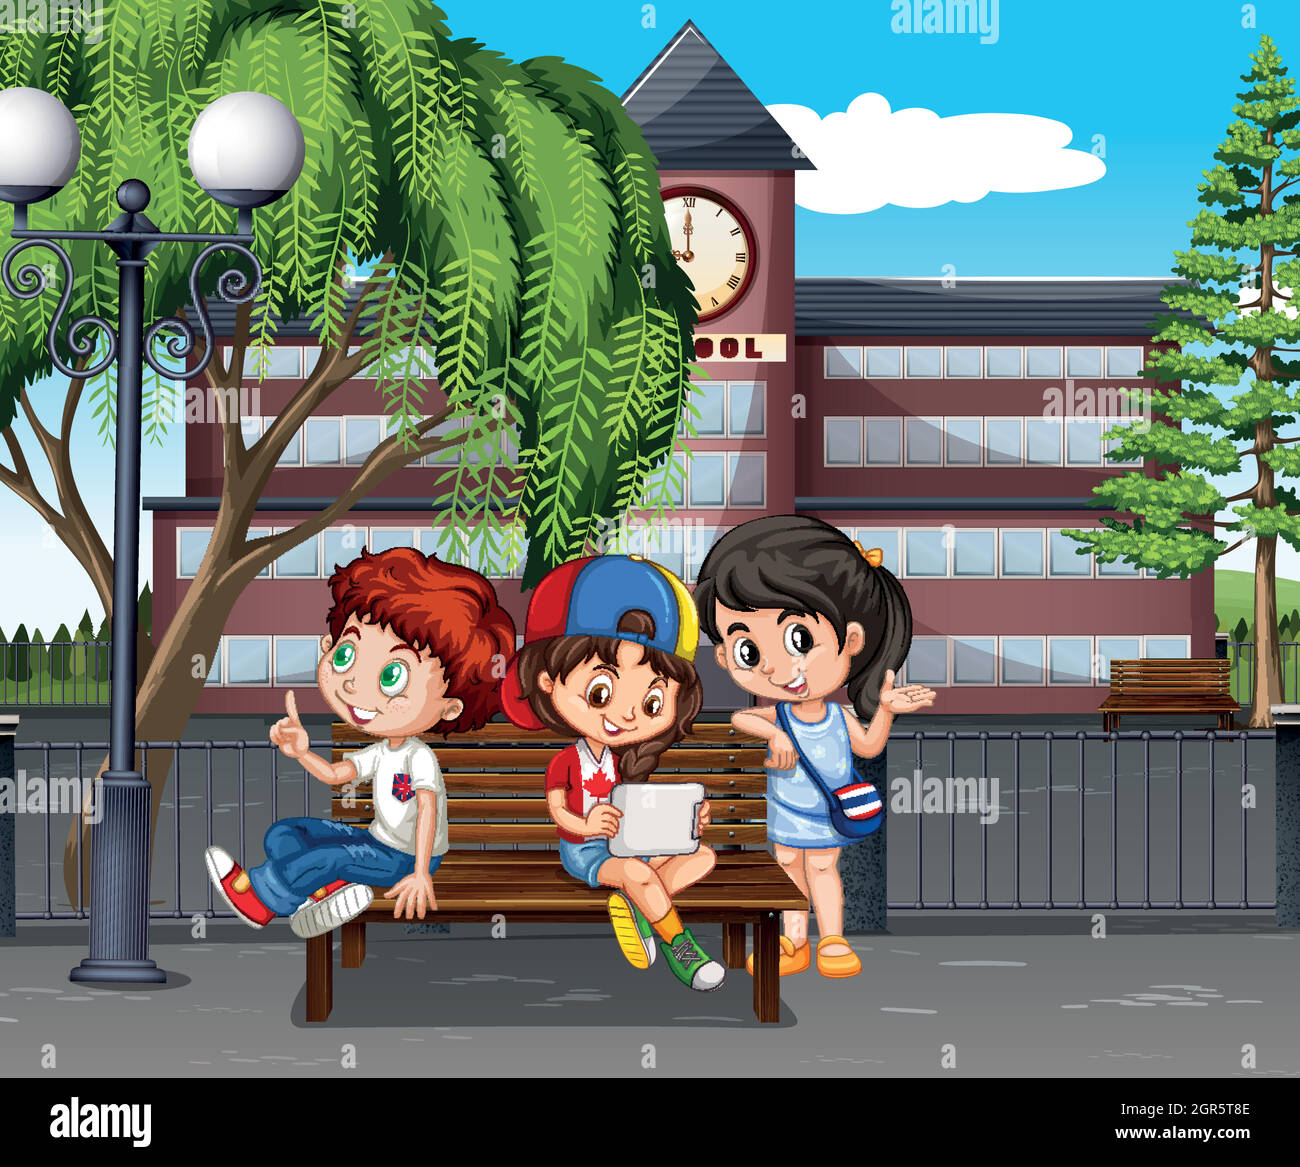 Children hanging out at the school Stock Vector